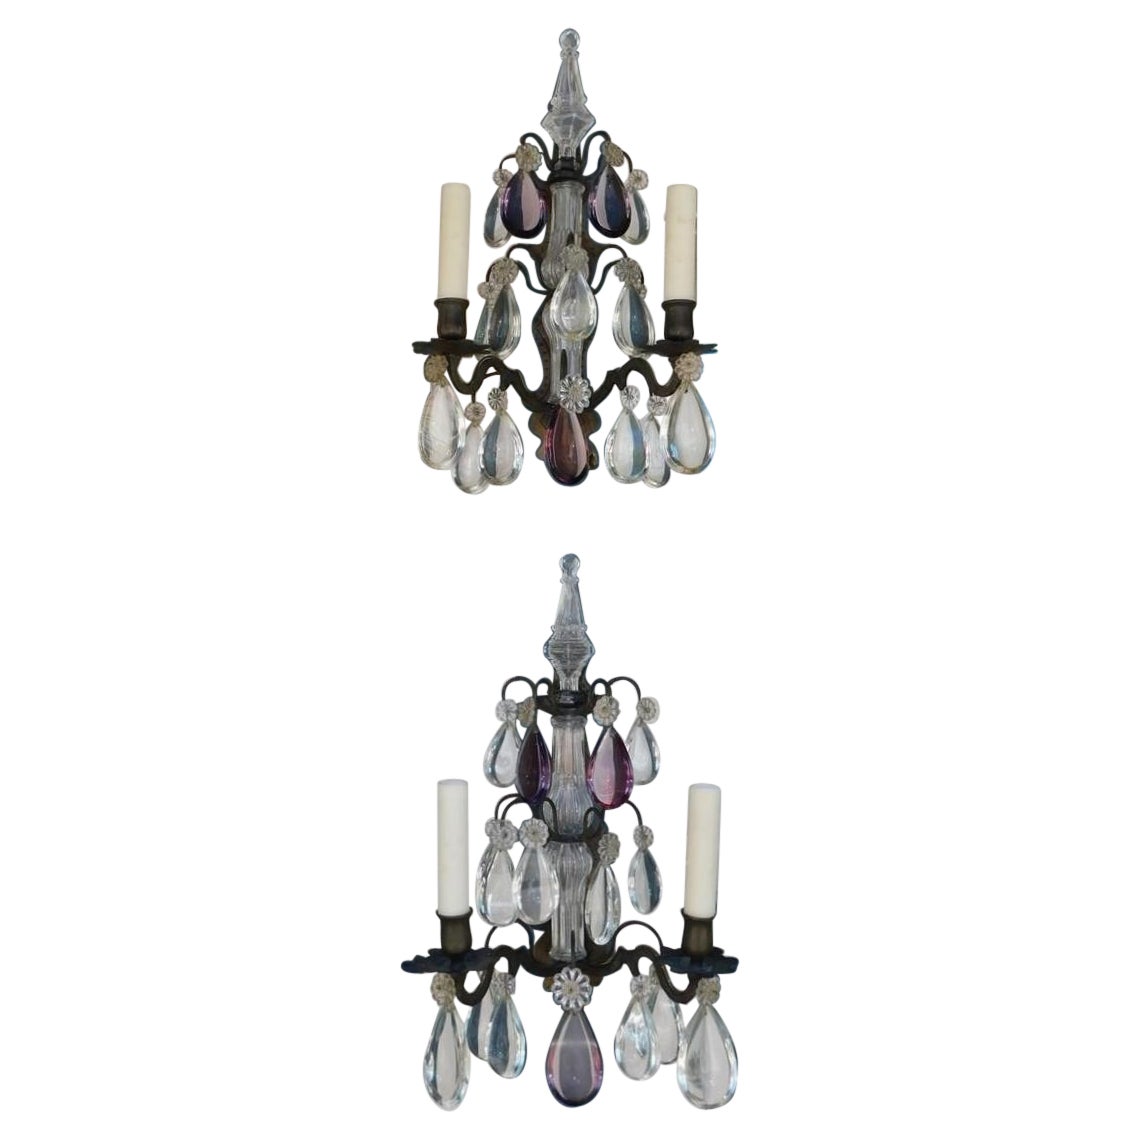 Pair of French Amethyst Crystal and Bronze Sphere Finial Wall Sconces, C. 1820 For Sale